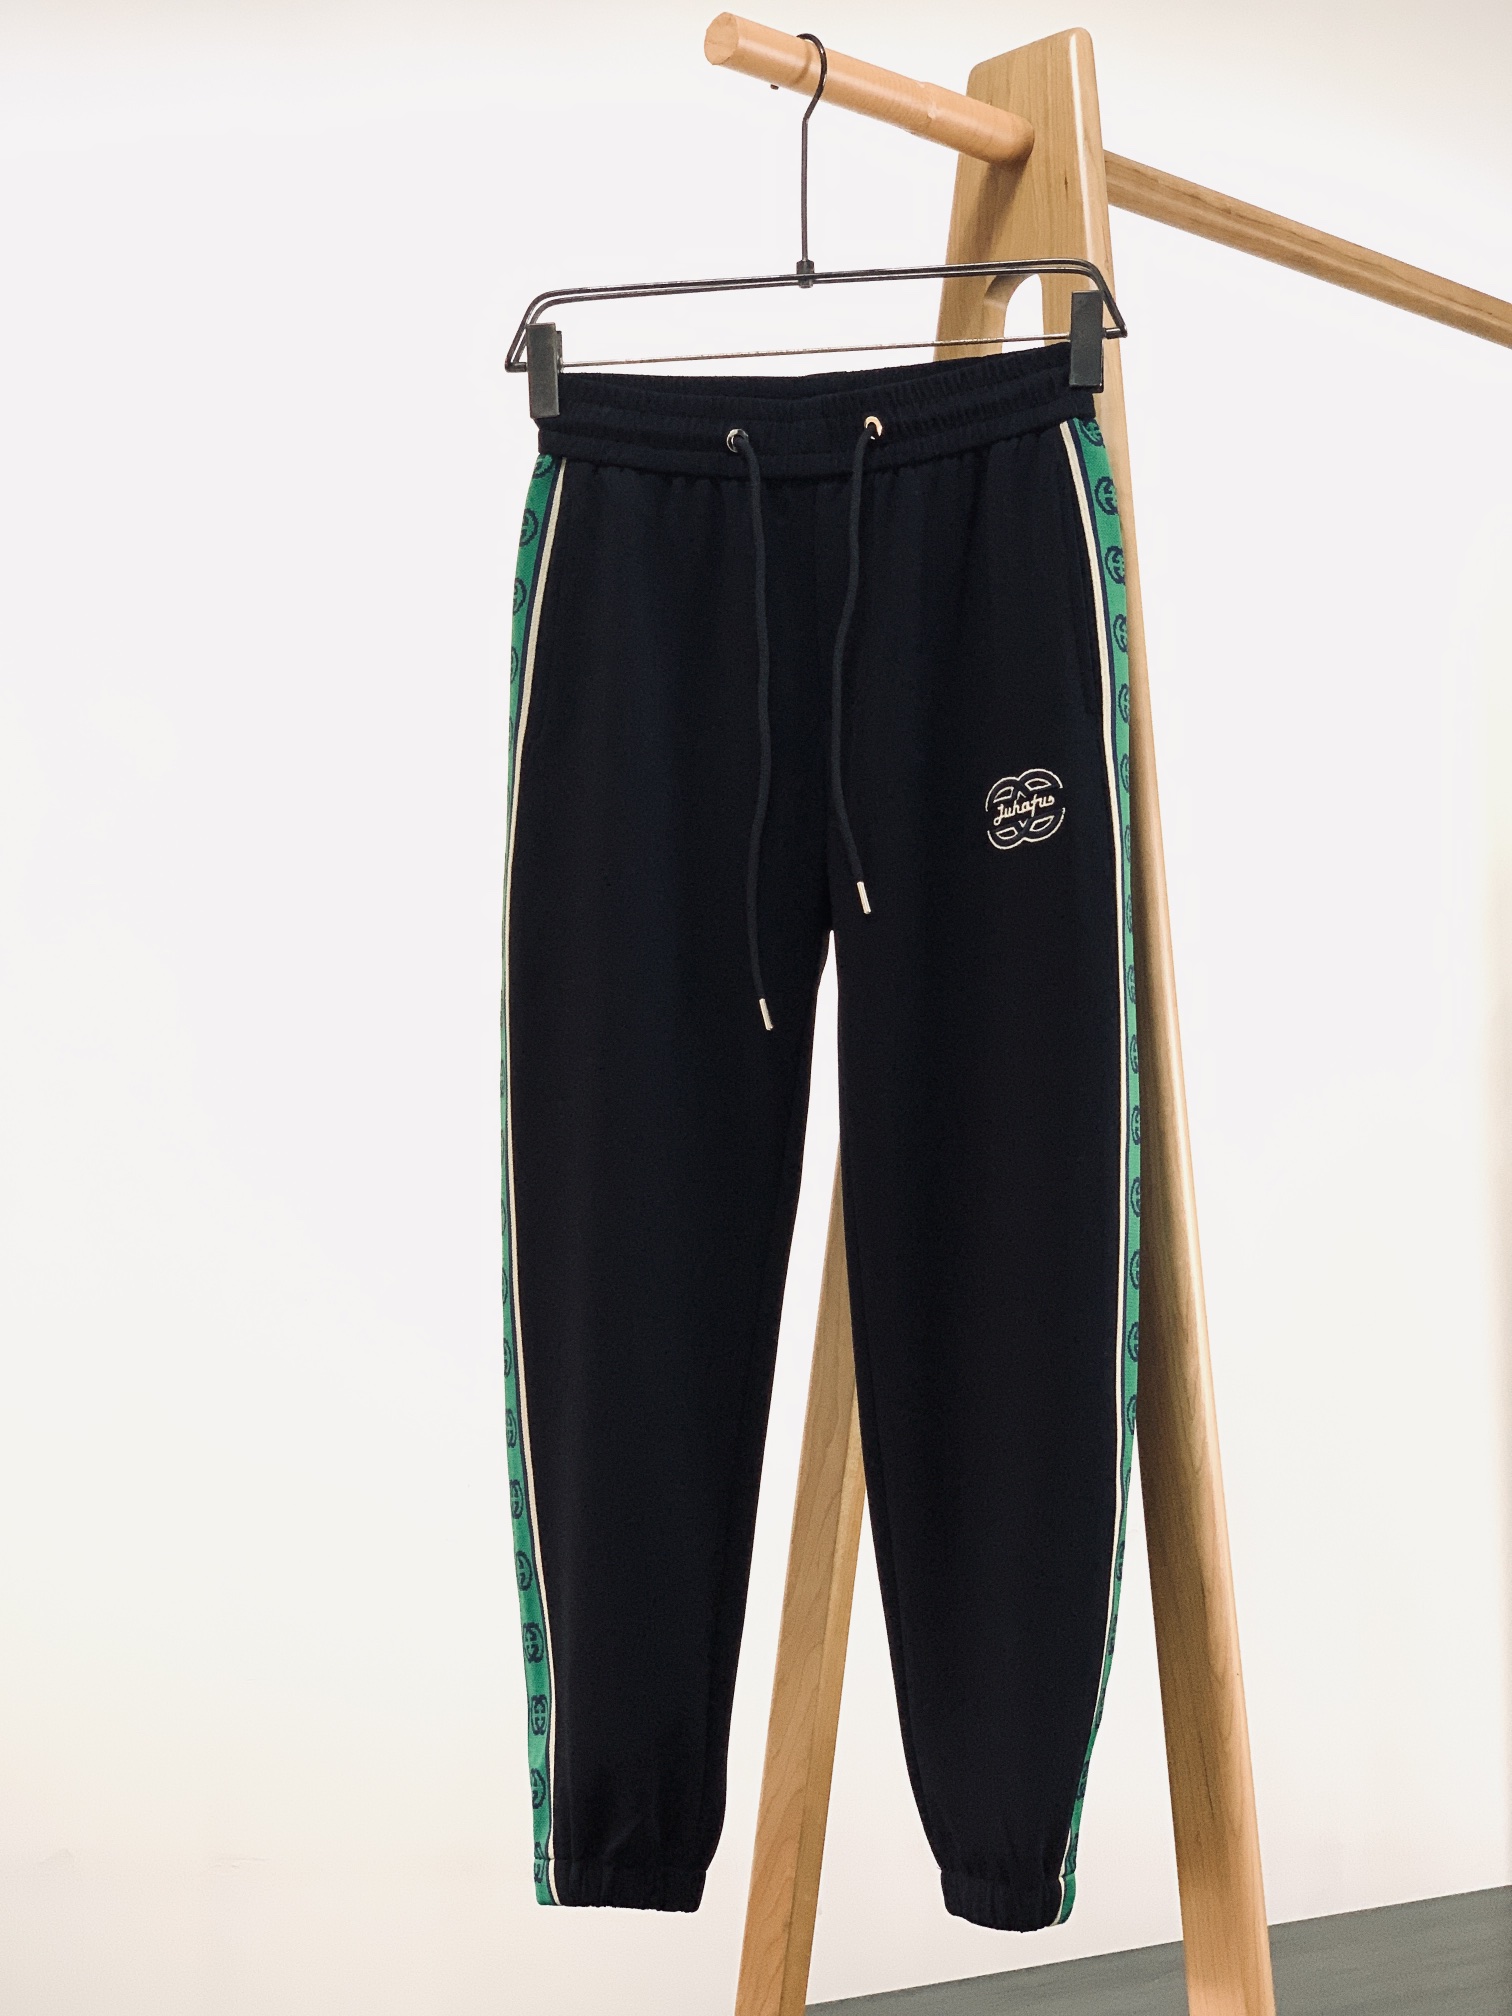 Gucci Clothing Pants & Trousers Embroidery Men Spring/Summer Collection Fashion Casual